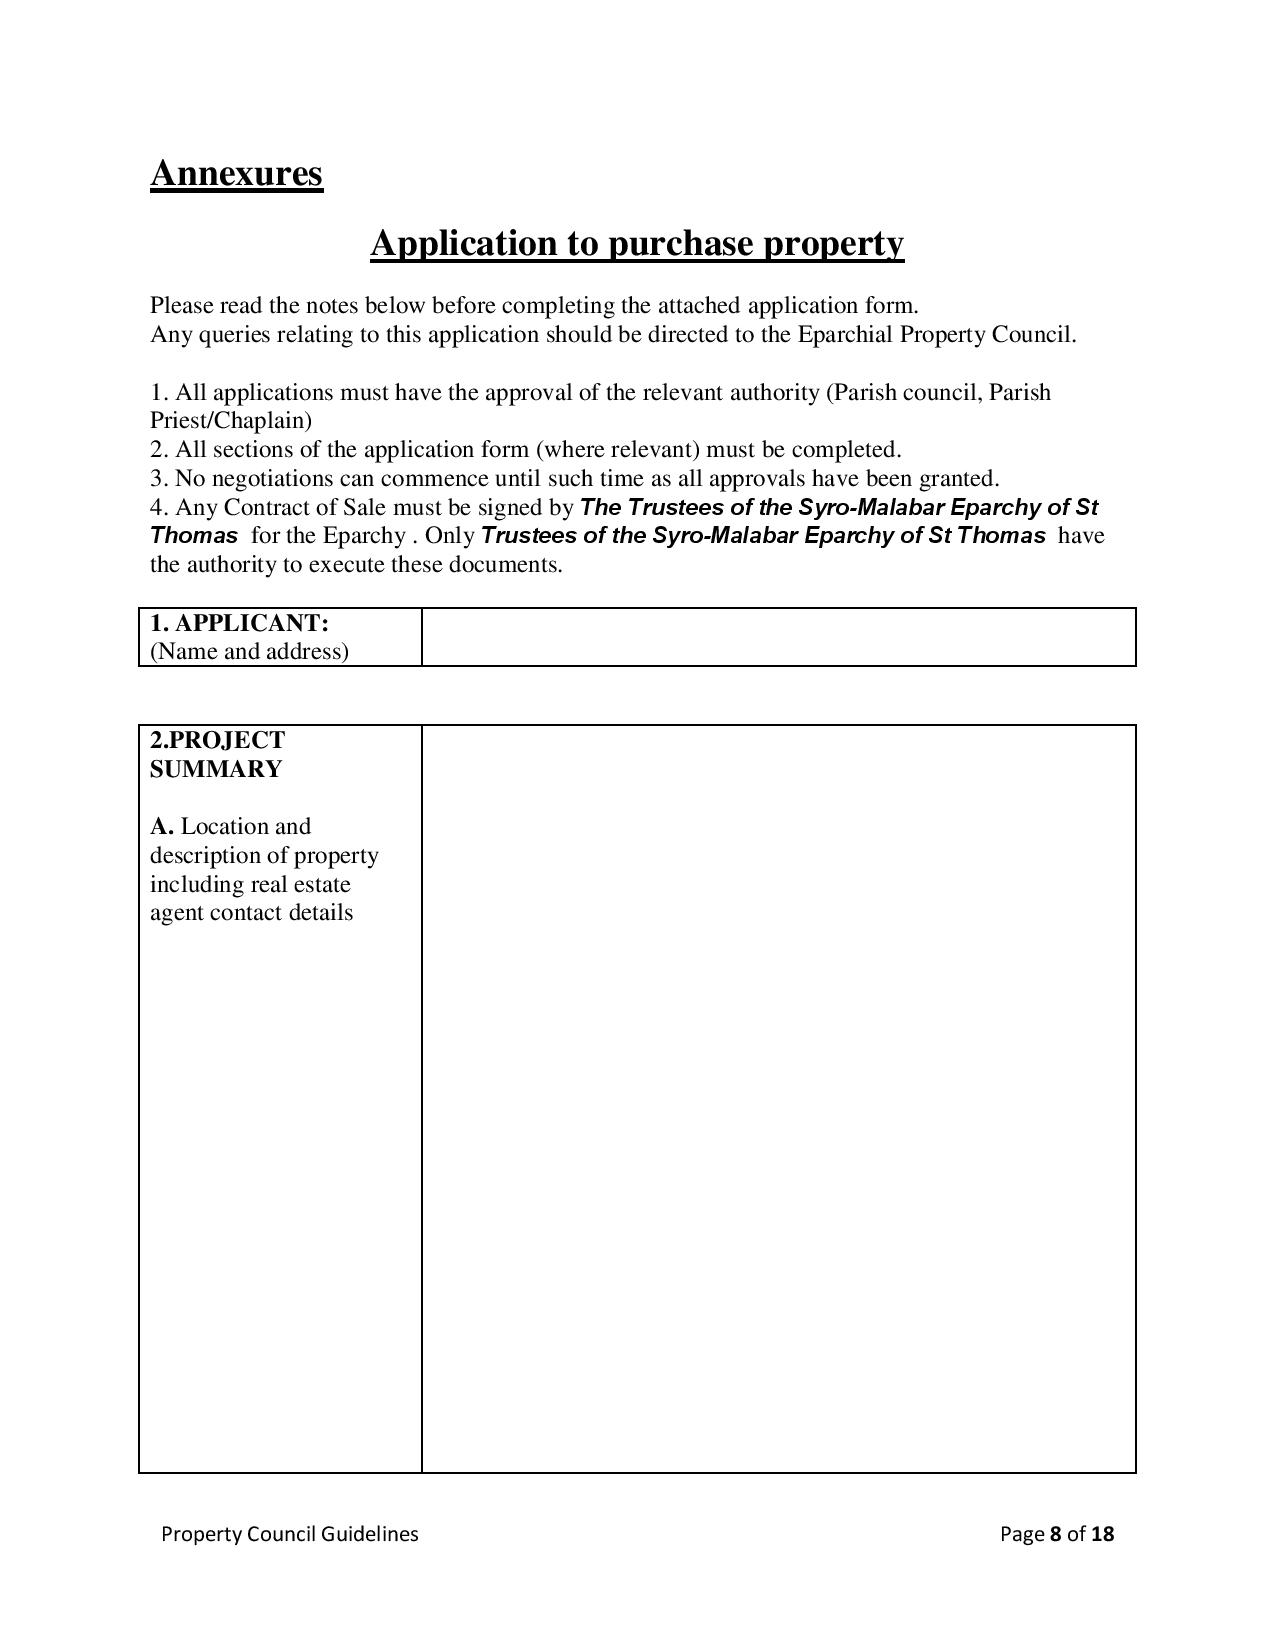 property-council-guidlines-v2-4-page-008